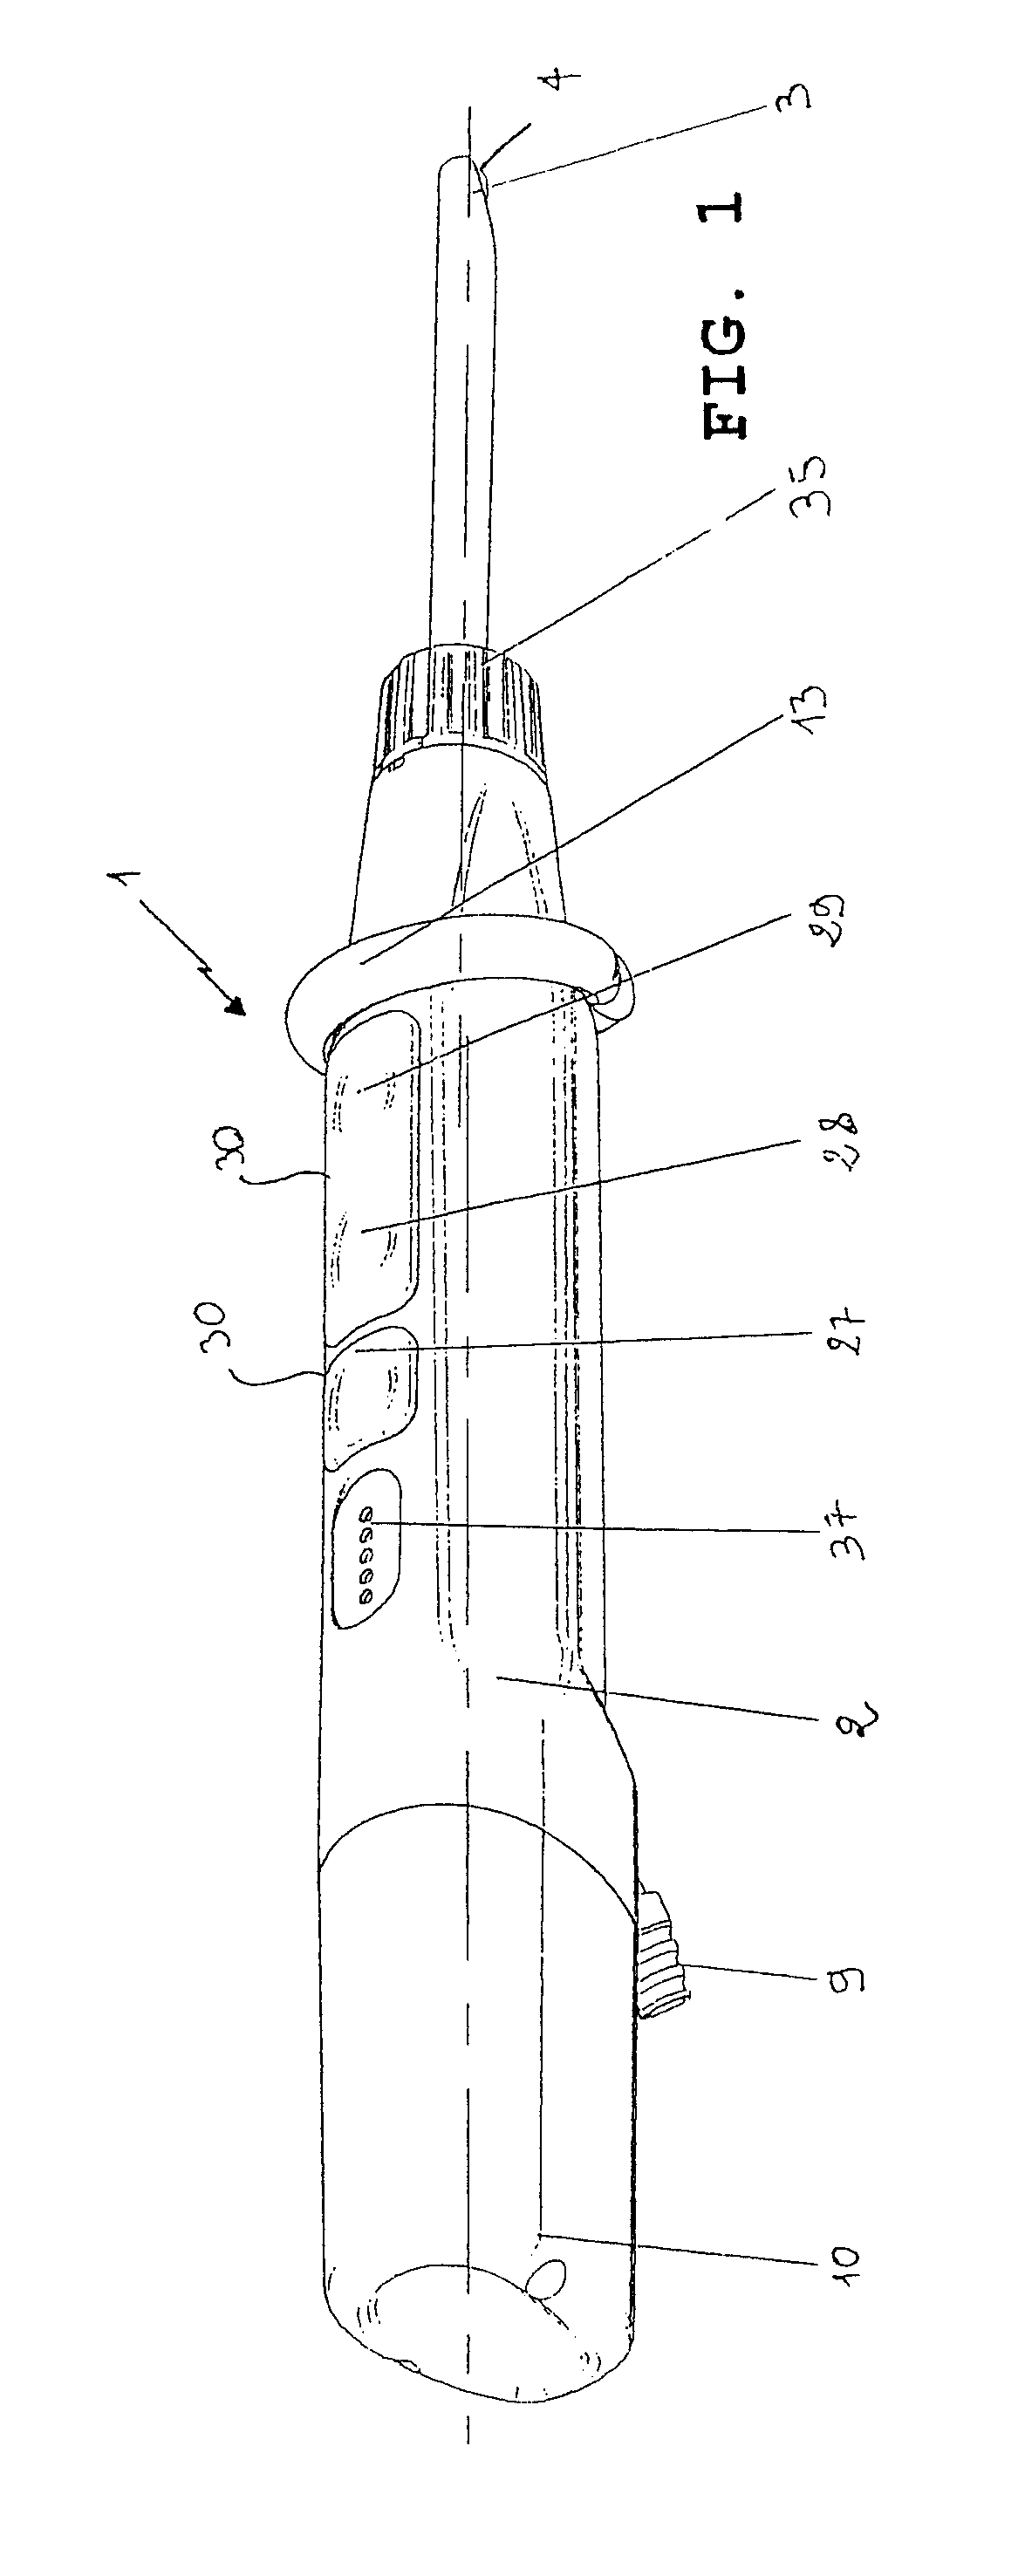 Device for treatments of endoscopic resection/removal of tissues